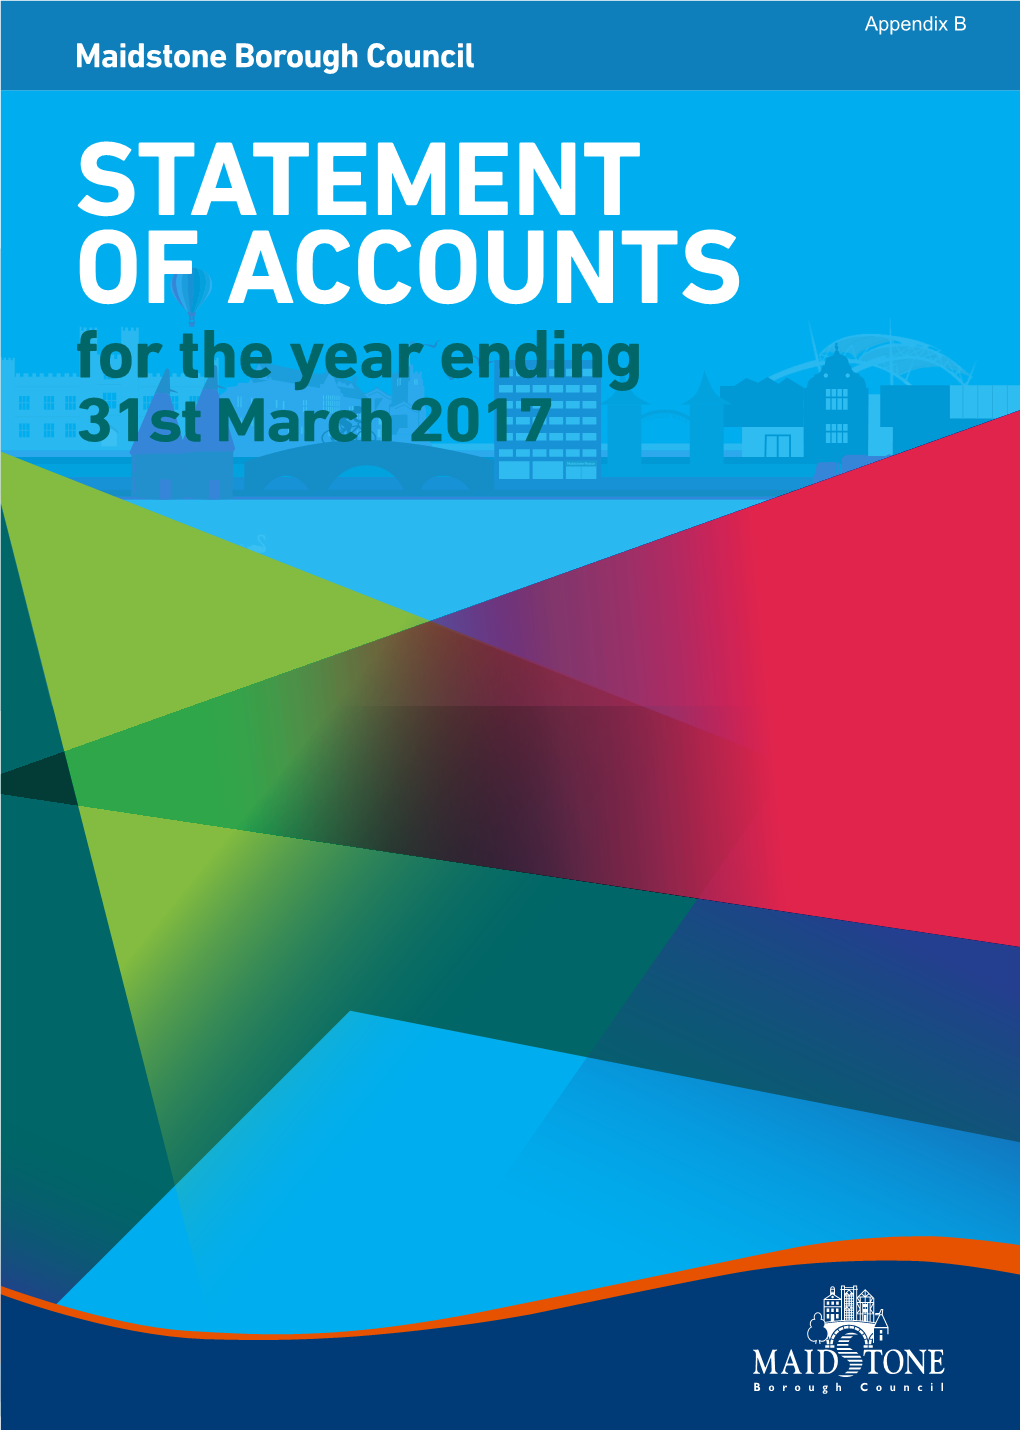 Maidstone Borough Council STATEMENT of ACCOUNTS for the Year Ending